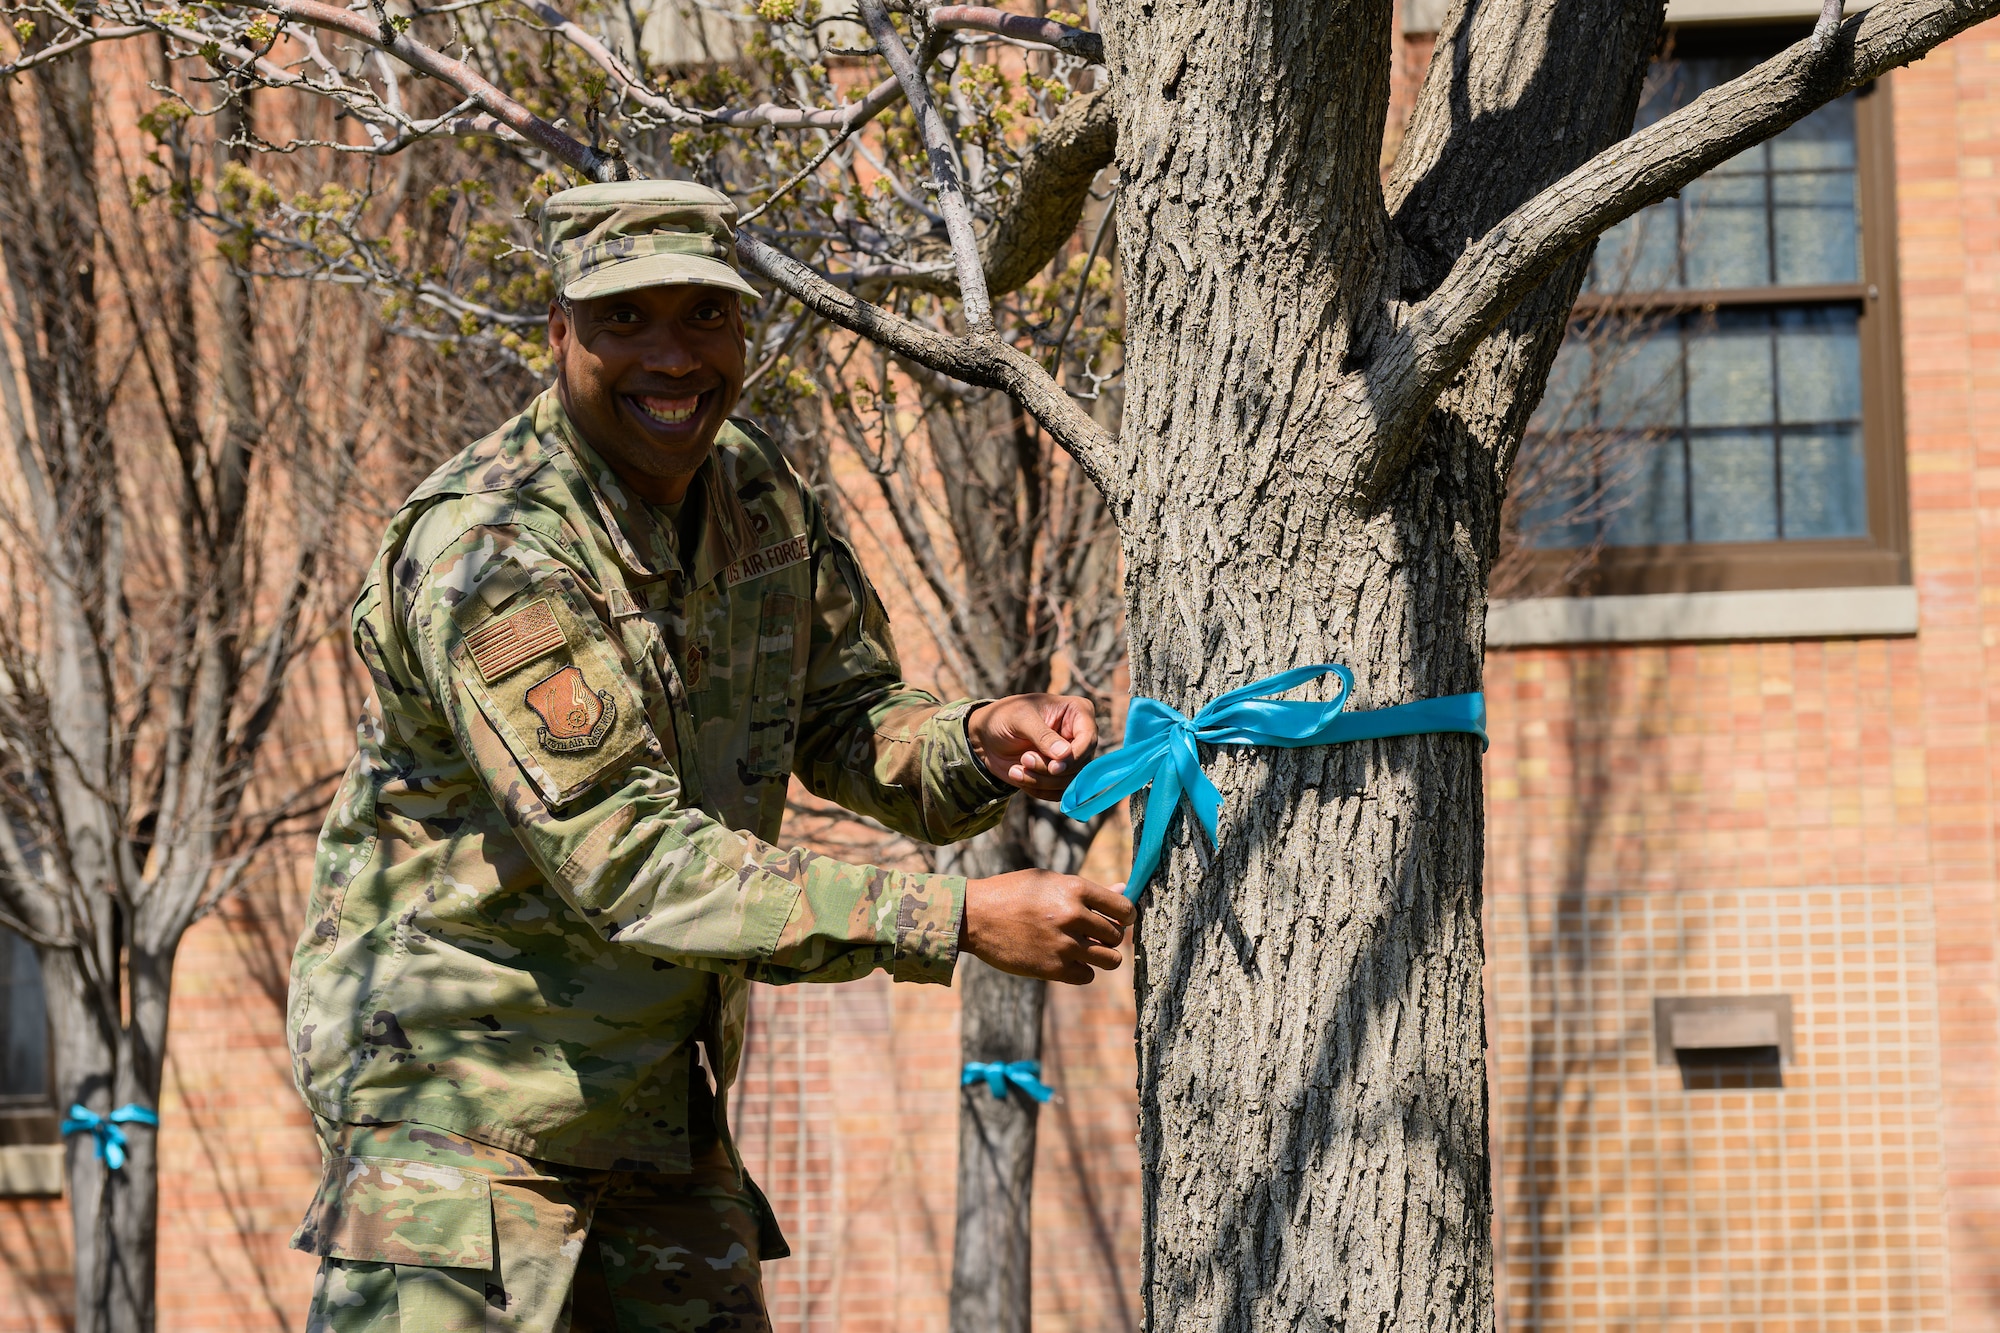 Chief Jackson ties a teal ribbon in a bow around the trunk of a tree.